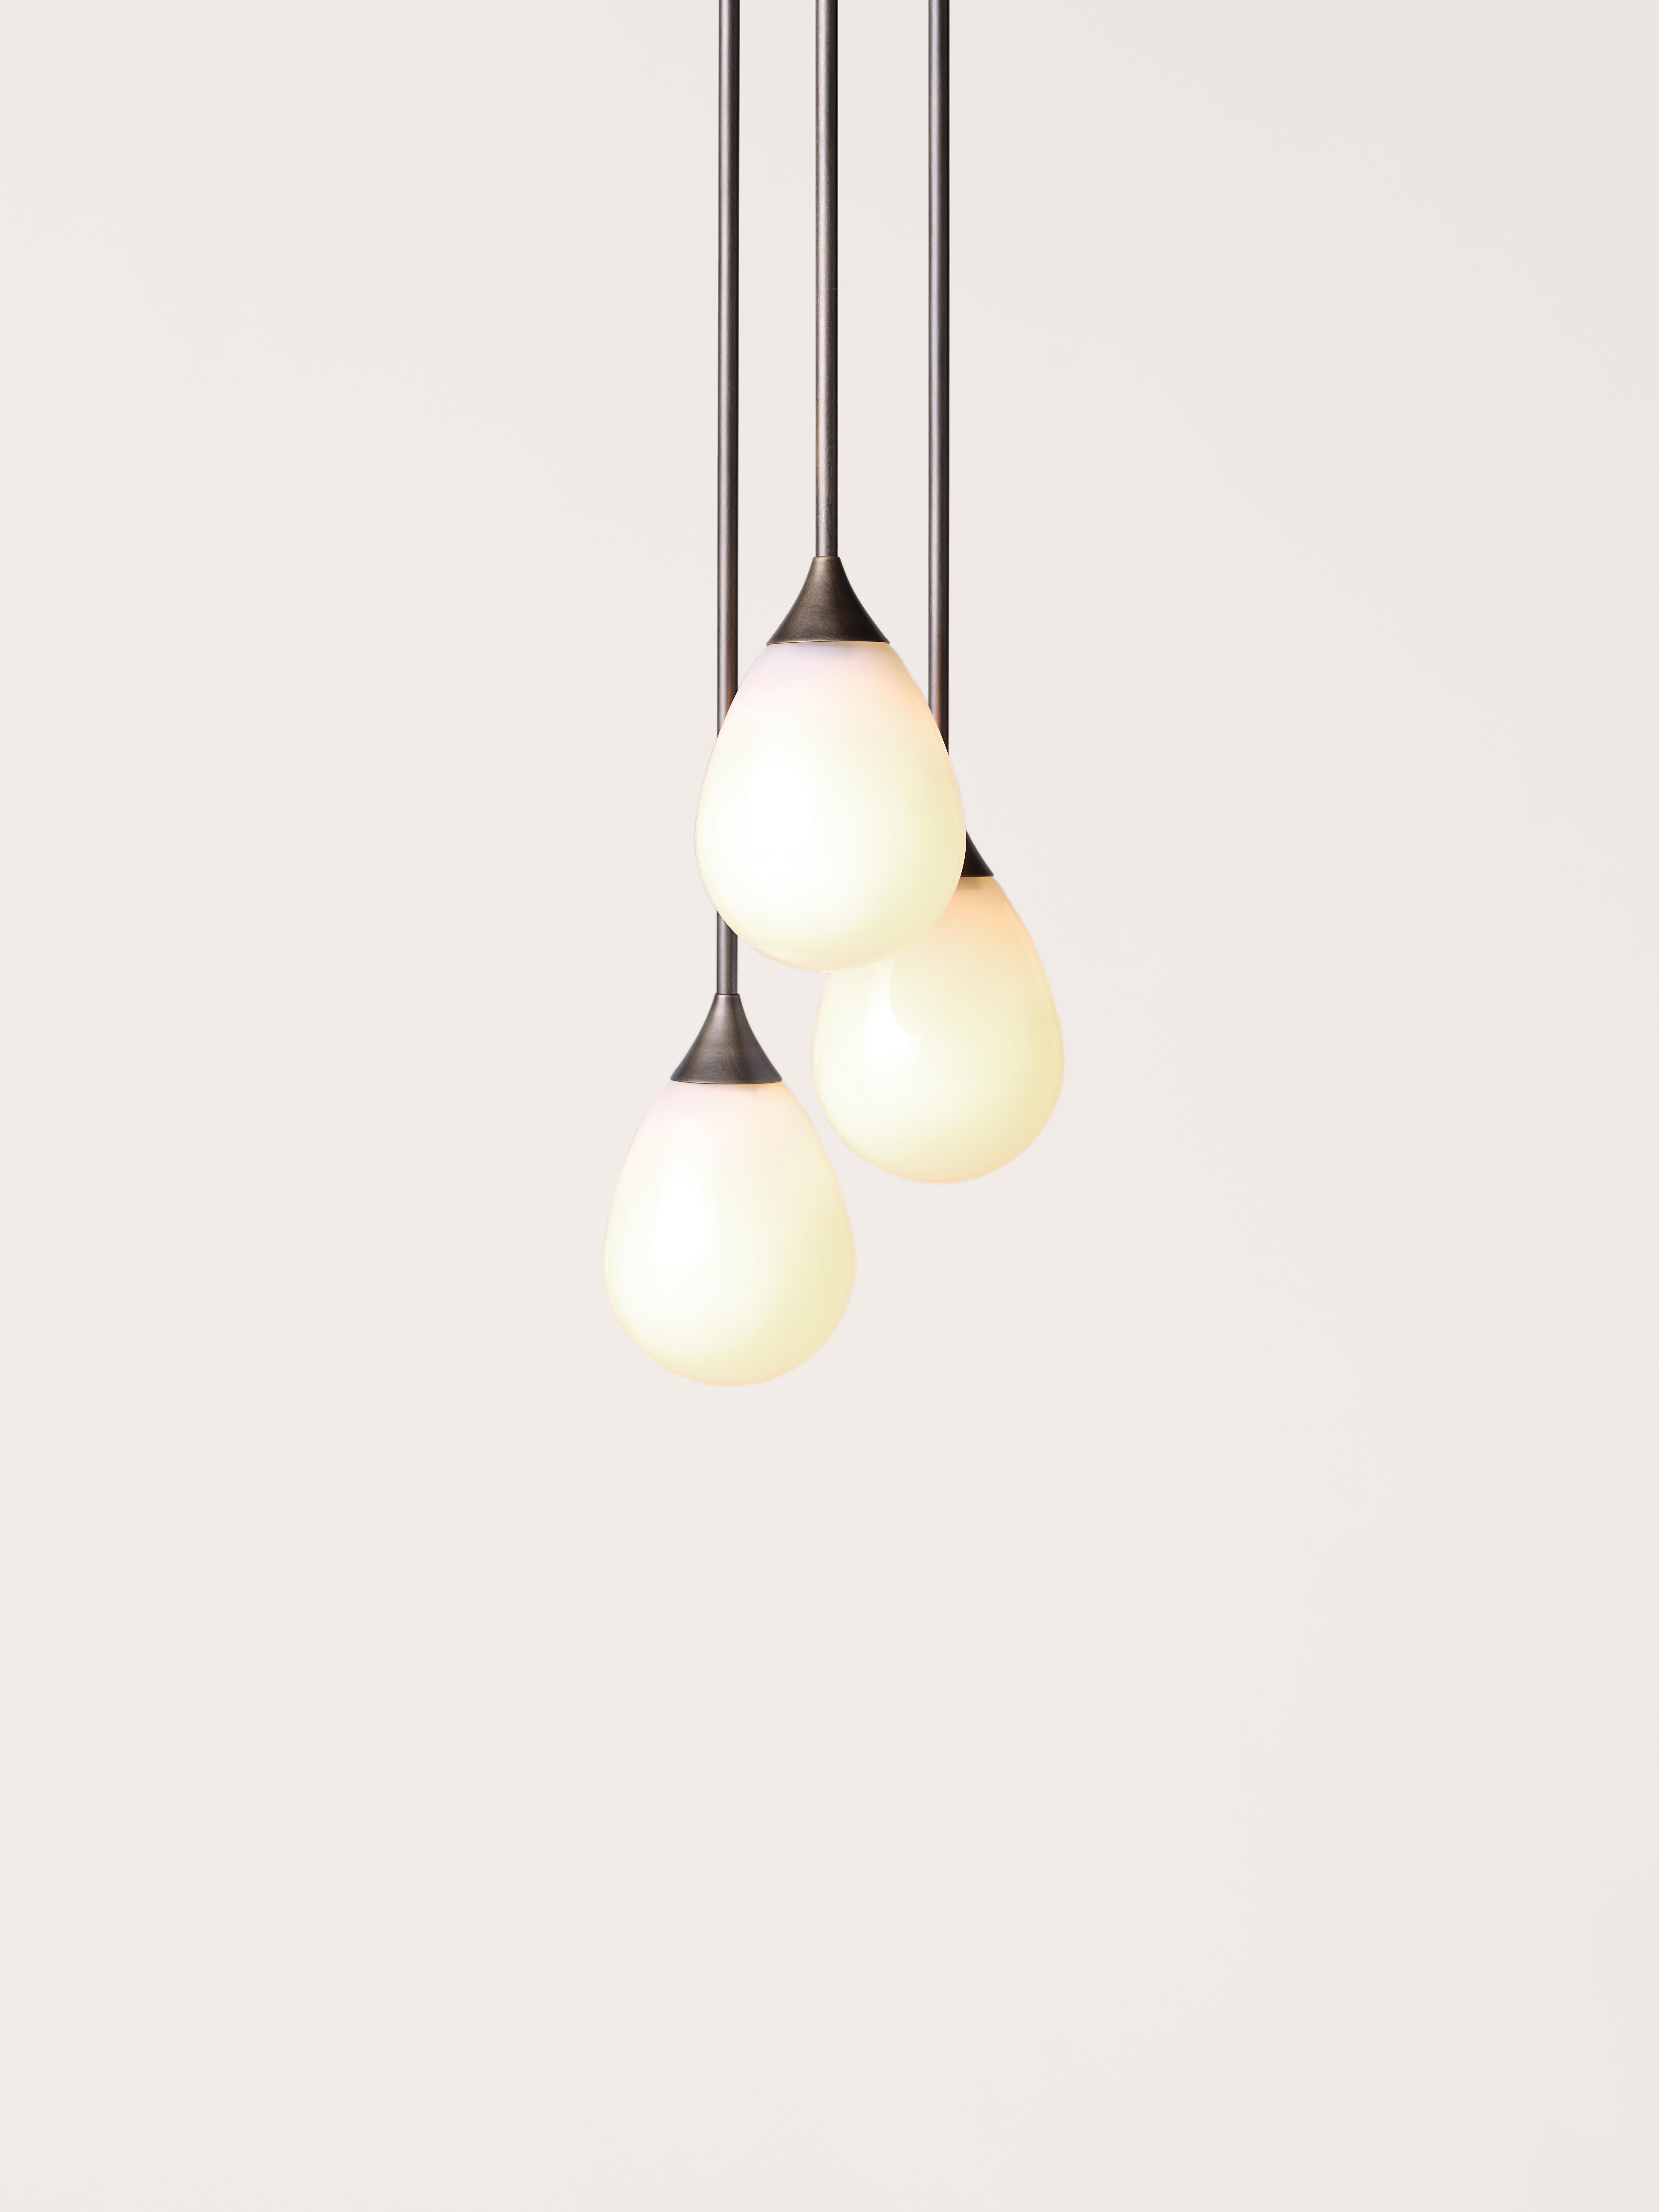 Three carefully crafted, hand blown glass pendants hang clustered together from spun brass for elongated and elegant tear-drop shapes. Also available in a larger size, and as a single pendant, a cluster of five and a sconce.

Metal finish:
Satin